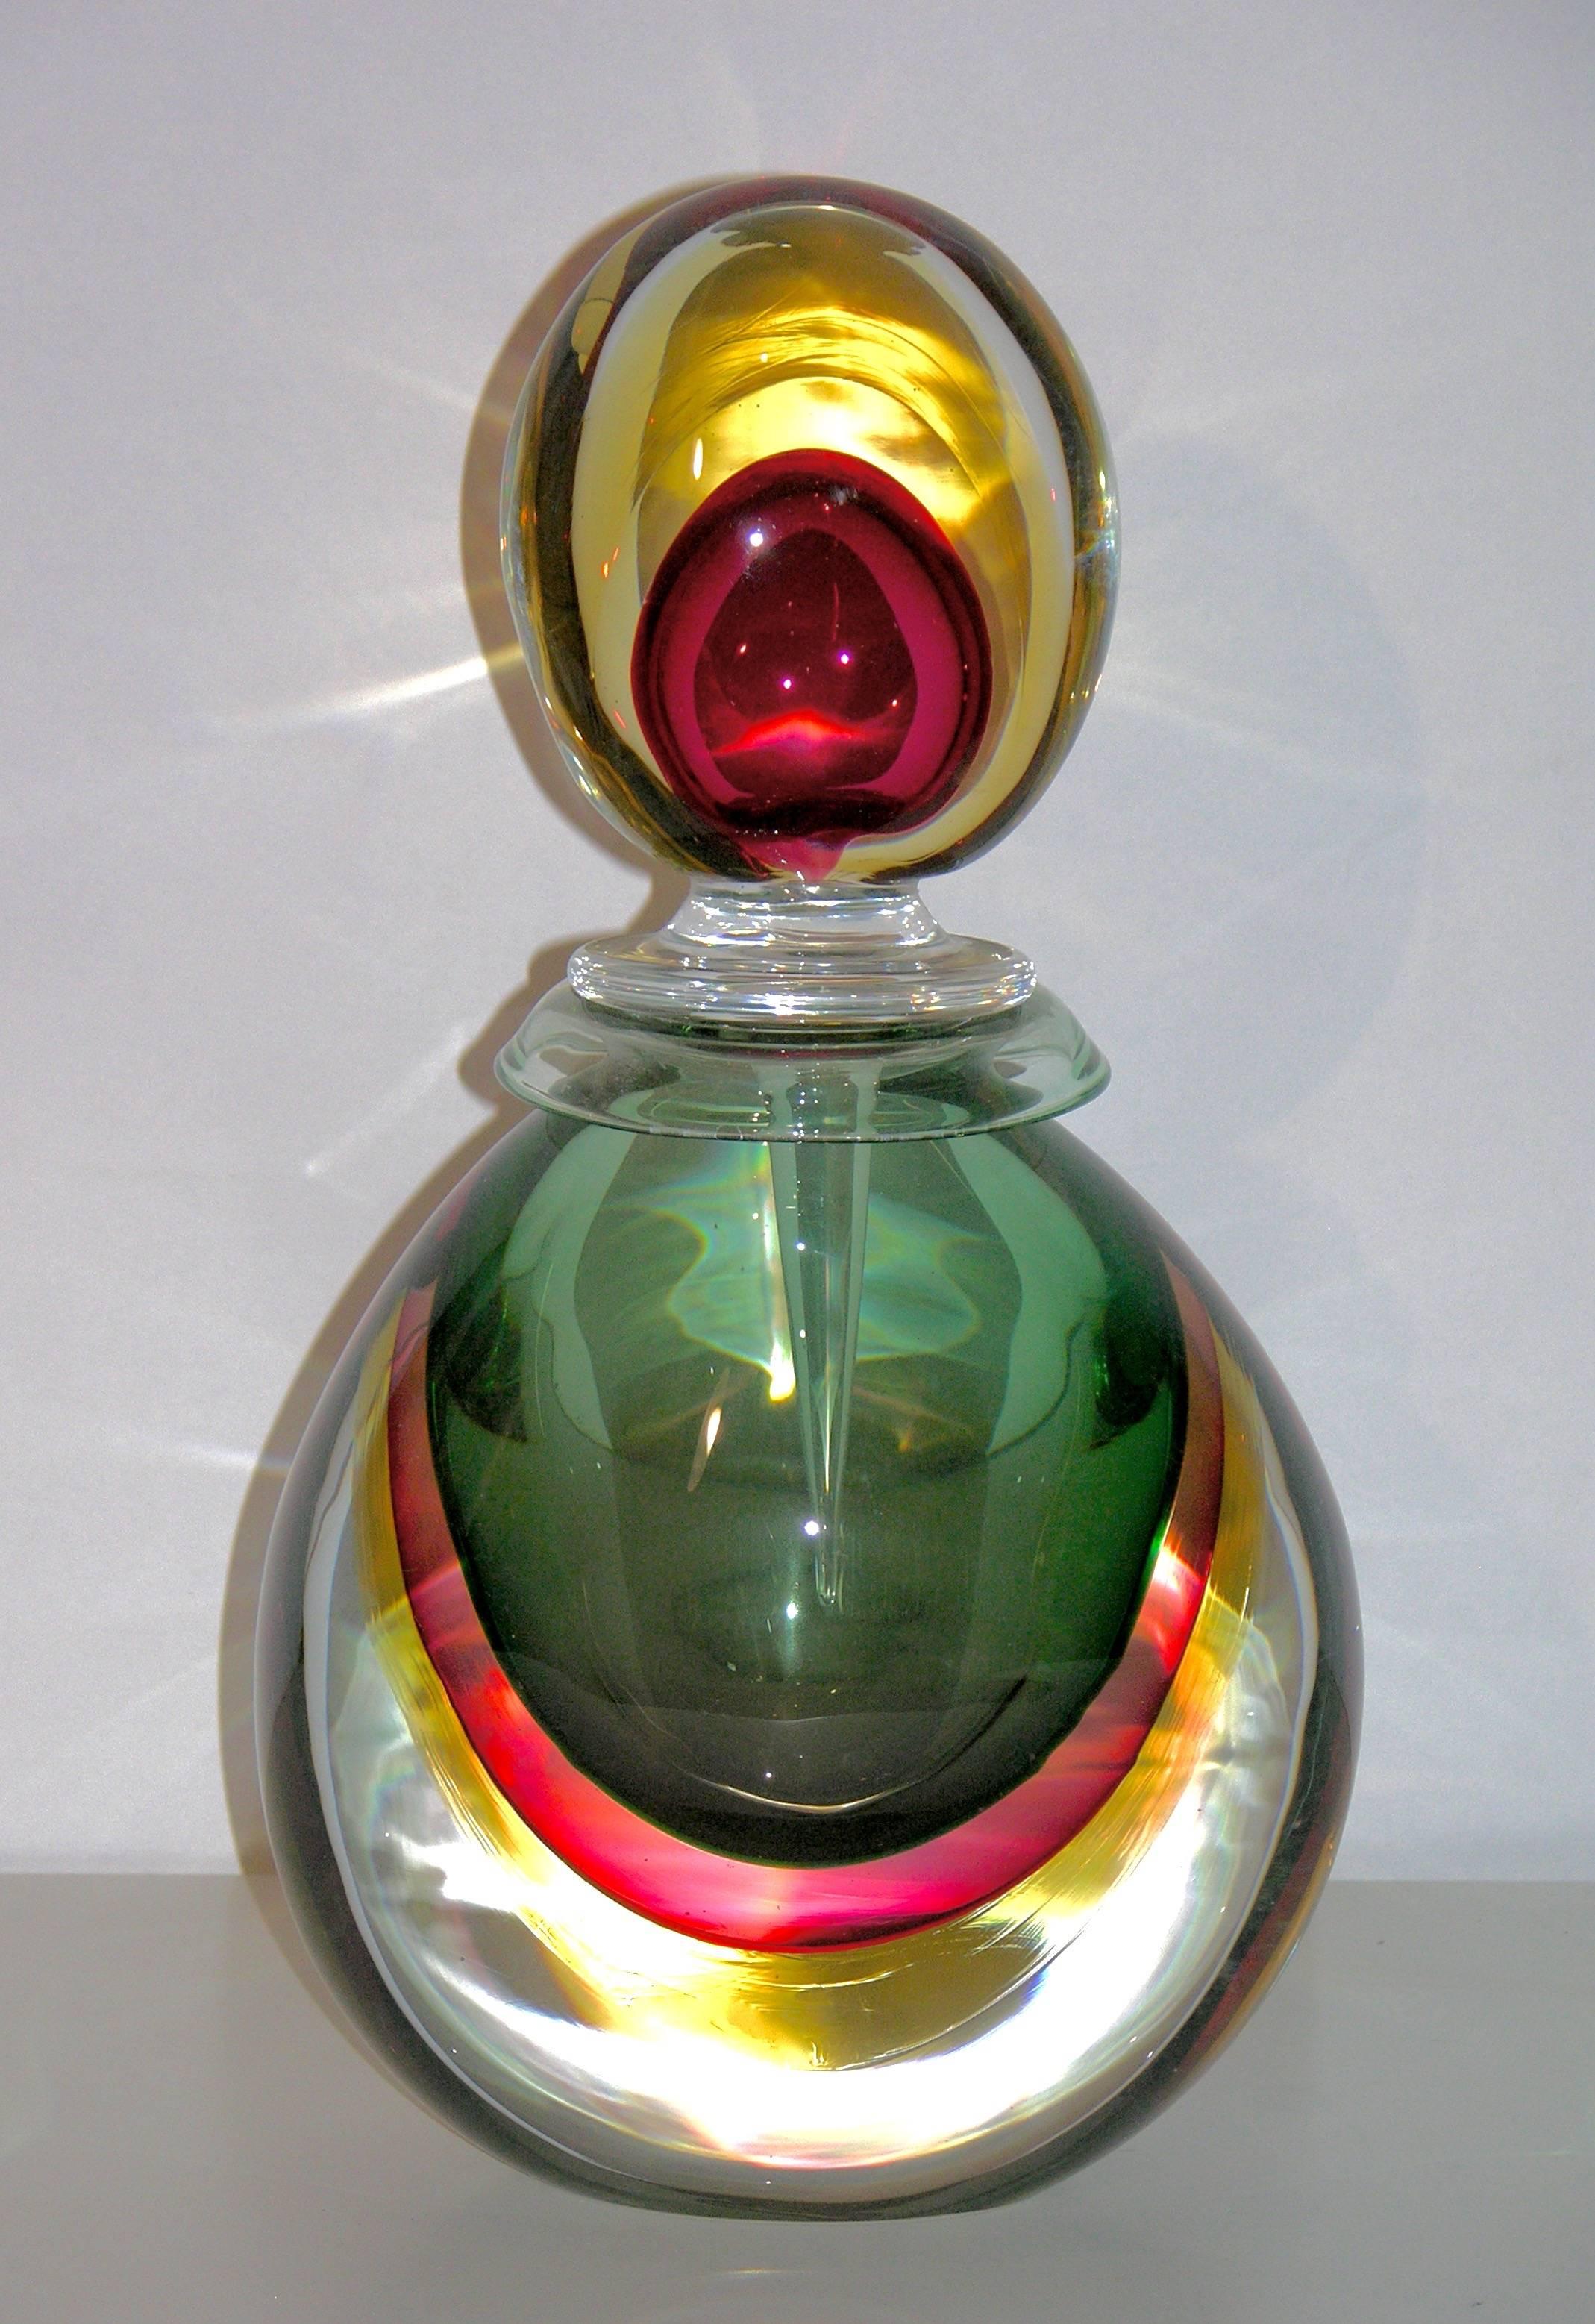 1990s, a very rare Italian bottle, Work of Art by Silvano Signoretto, with drop stopper, in blown Murano glass decorated with the Venetian technique Sommerso, the green body encased in the lower part with red, yellow and clear glass layers. The